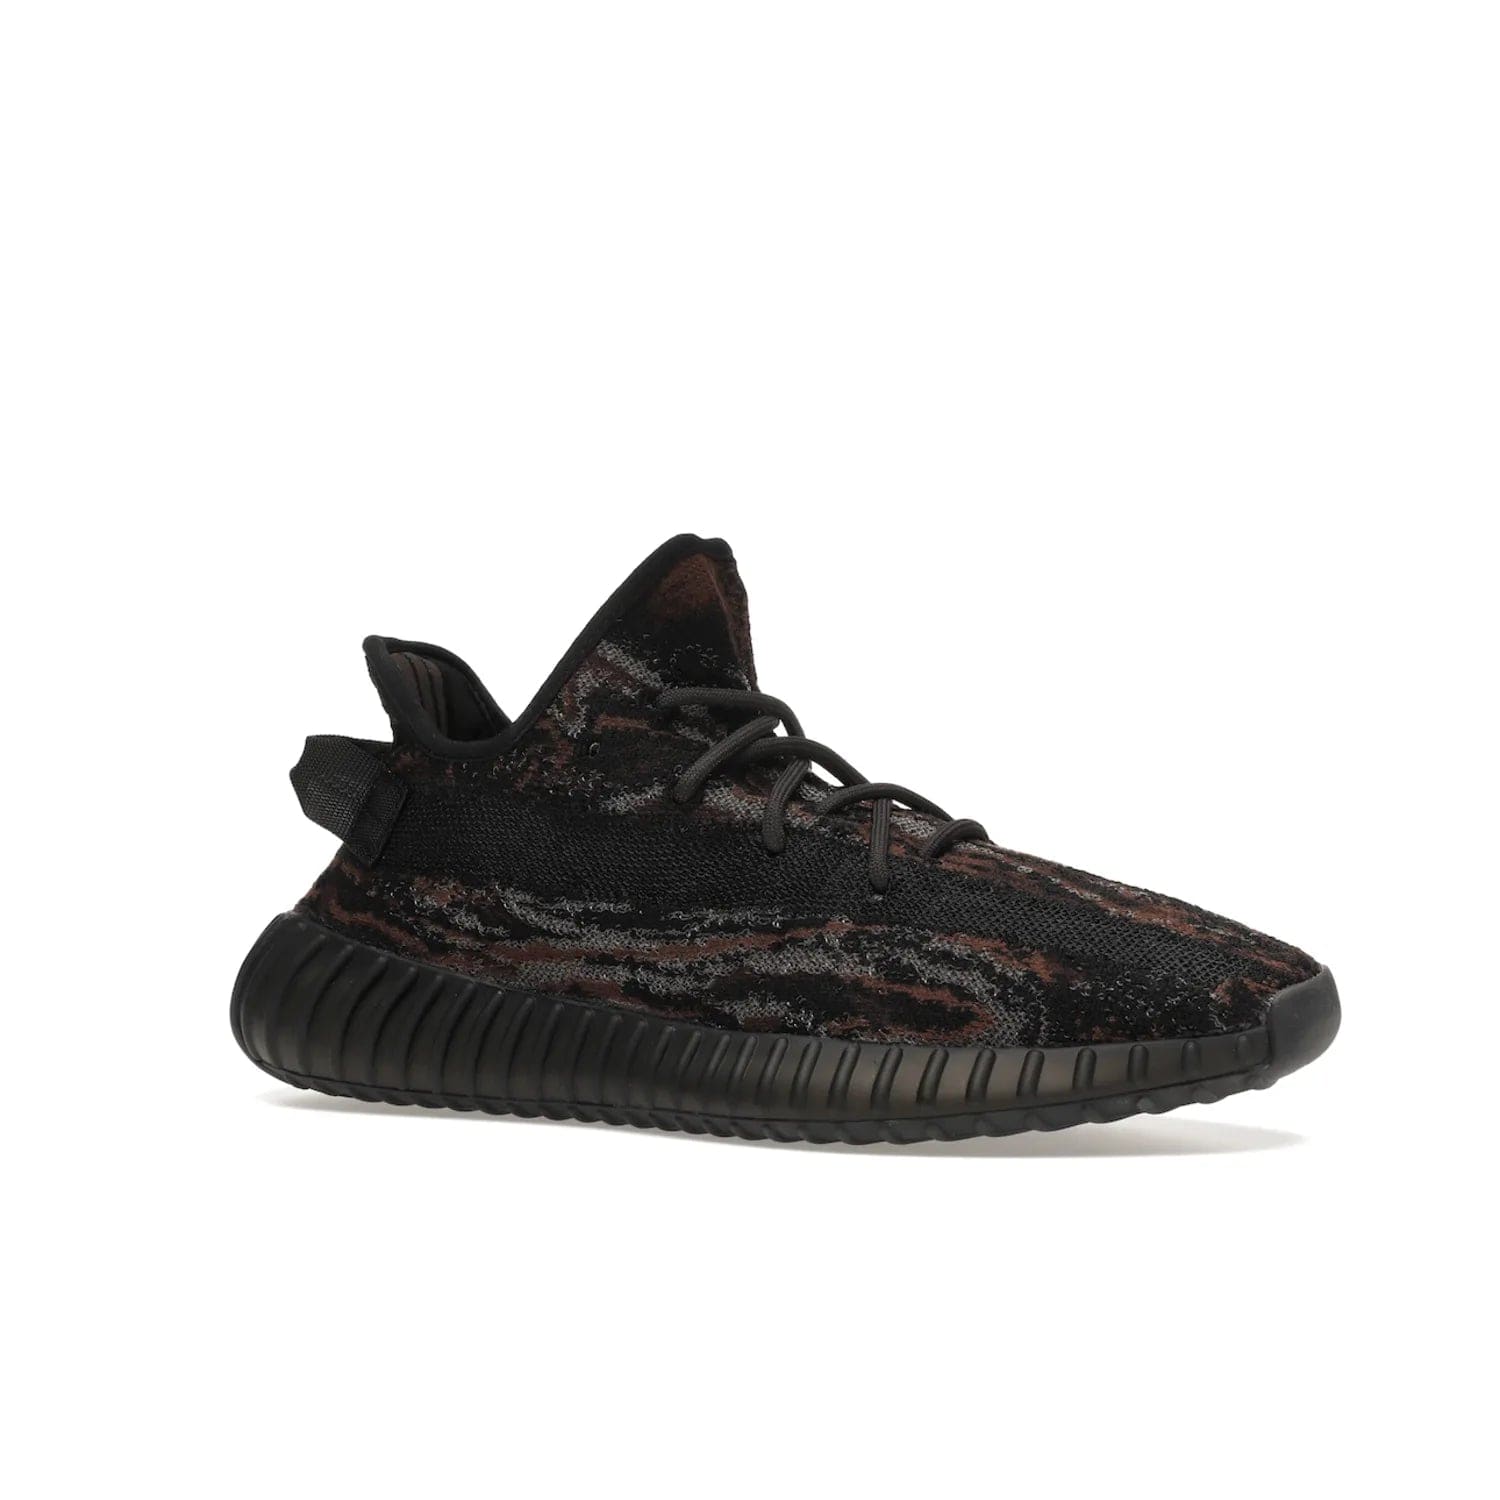 adidas Yeezy Boost 350 V2 MX Rock - Image 4 - Only at www.BallersClubKickz.com - The adidas Yeezy Boost 350 V2 MX Rock features a stylish marbled upper of black, grey, and brown tones. Shop the signature Boost sole, heel tab, and mesh side stripe now, available December of 2021.